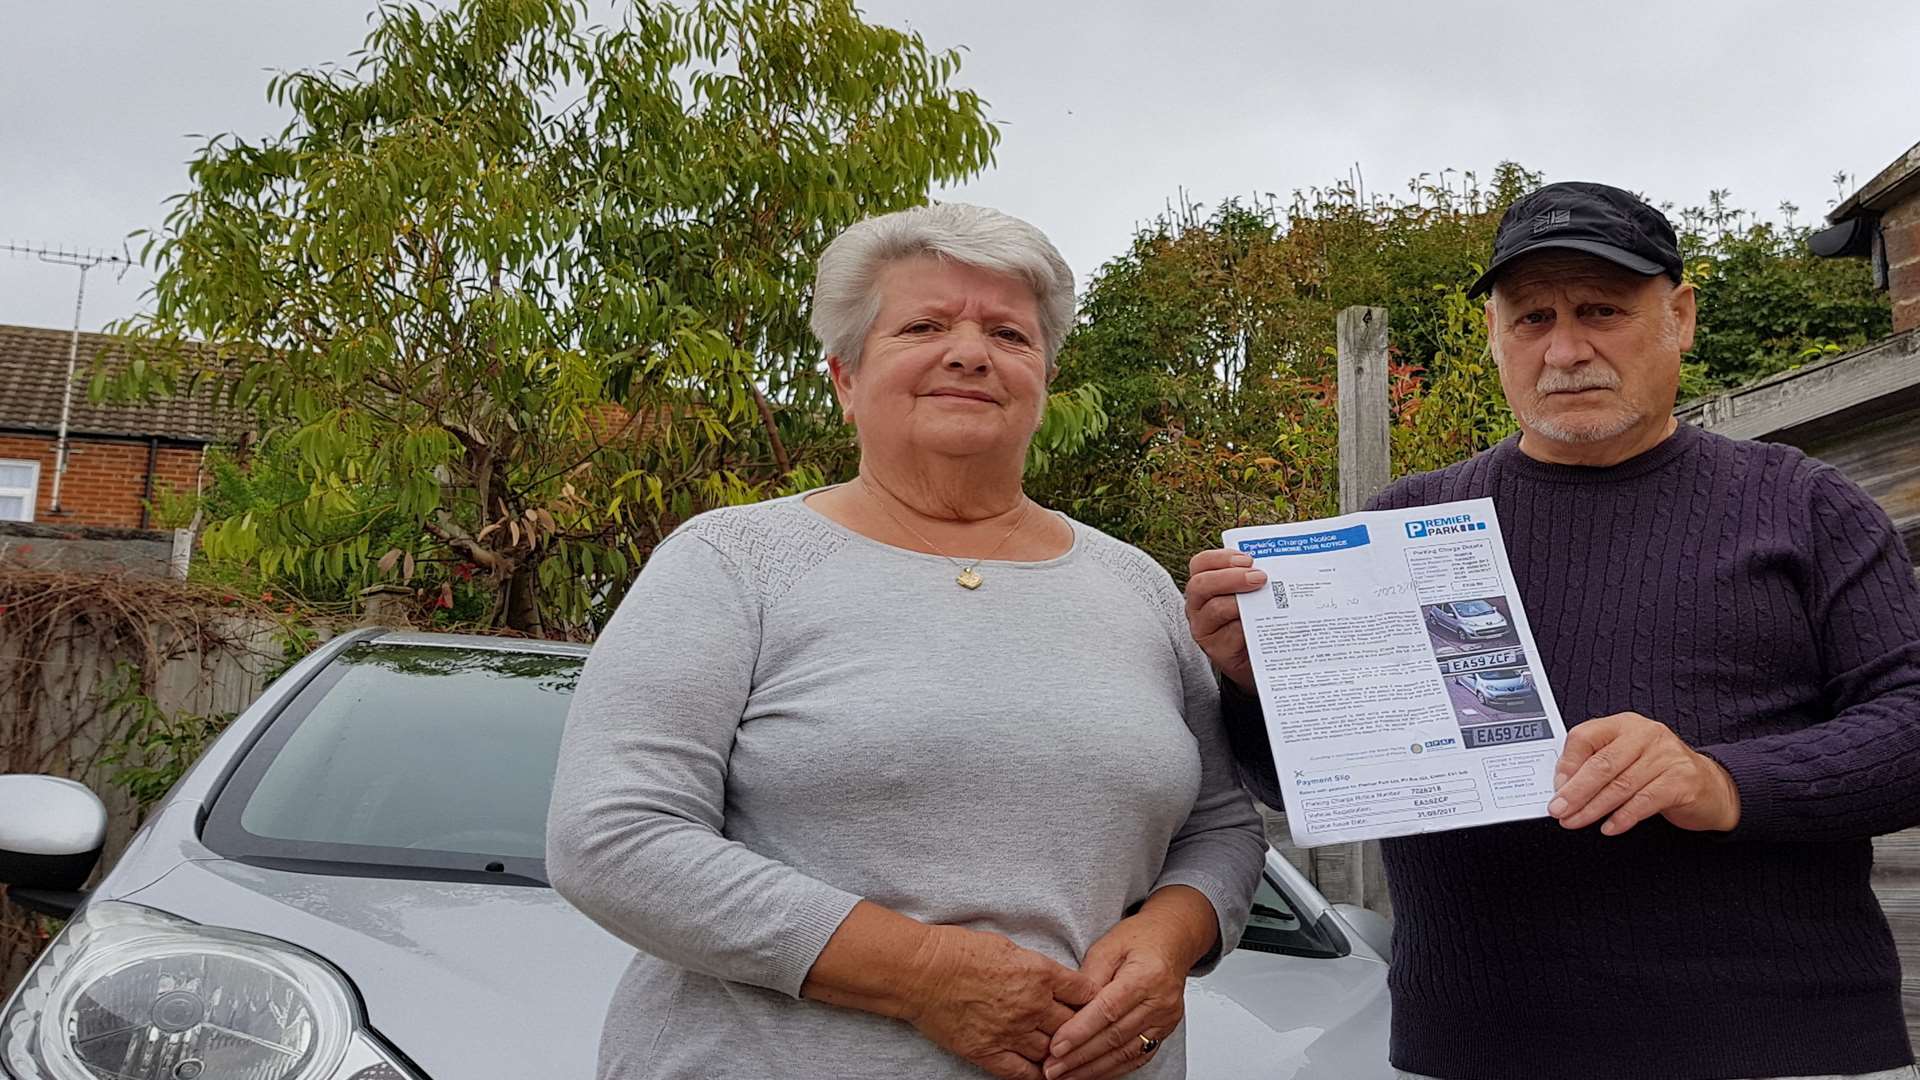 Terry and Jean Brooker have been fined £100 after disputing a parking notice at St George's Shopping Centre, Gravesend